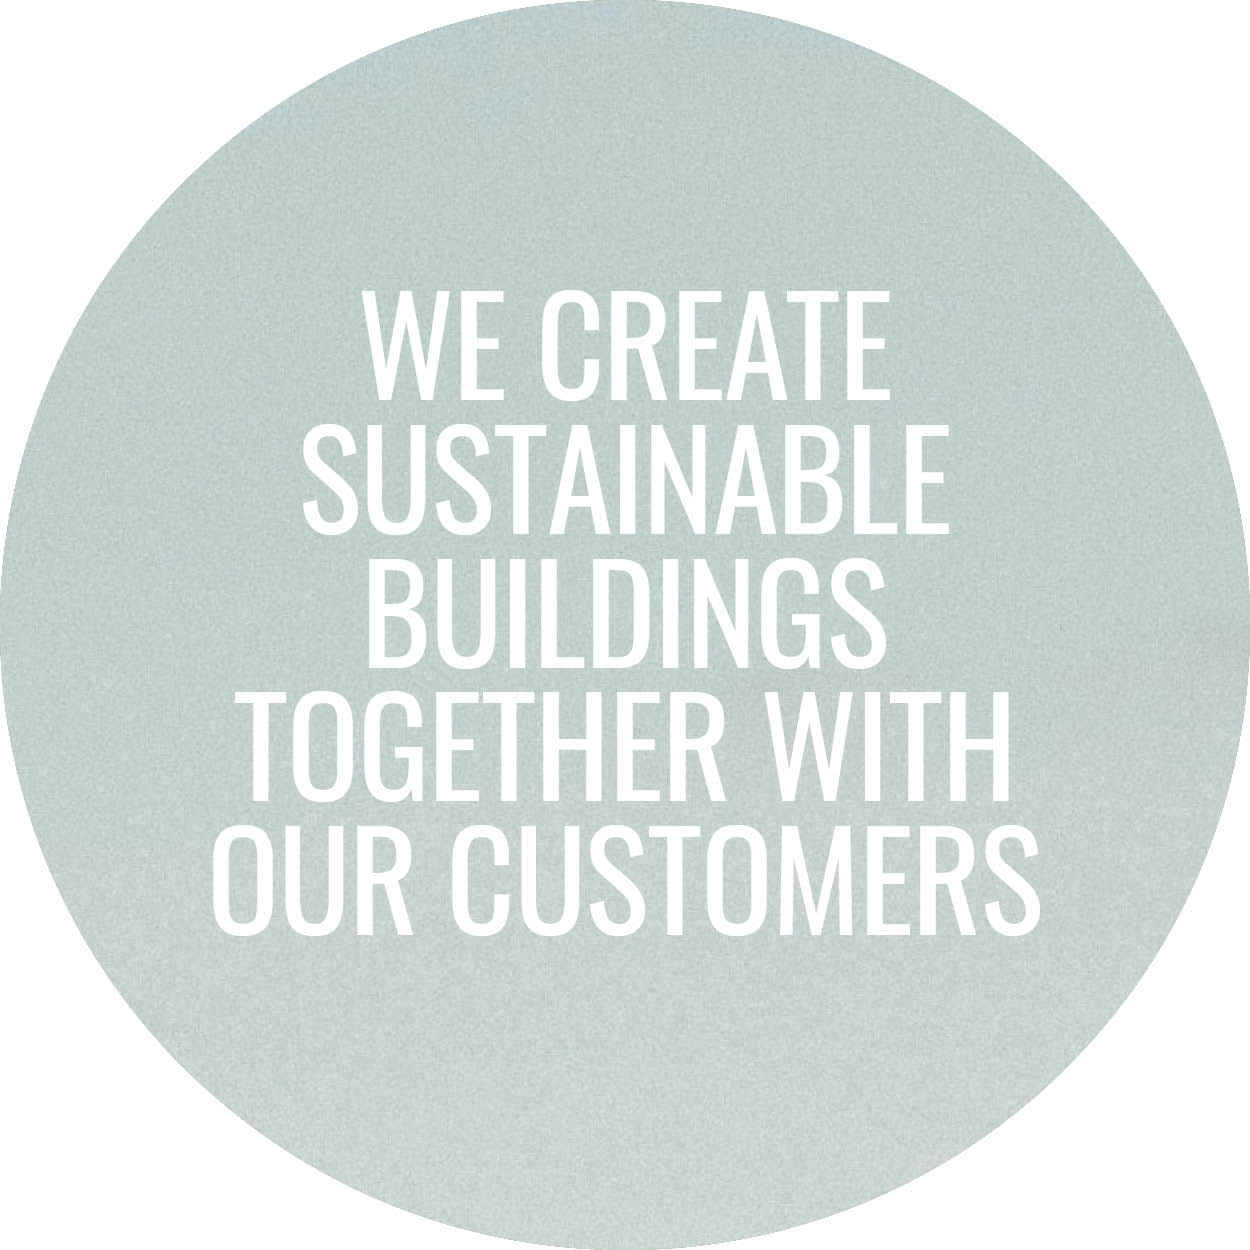 We create sustainable buildings together with our customers